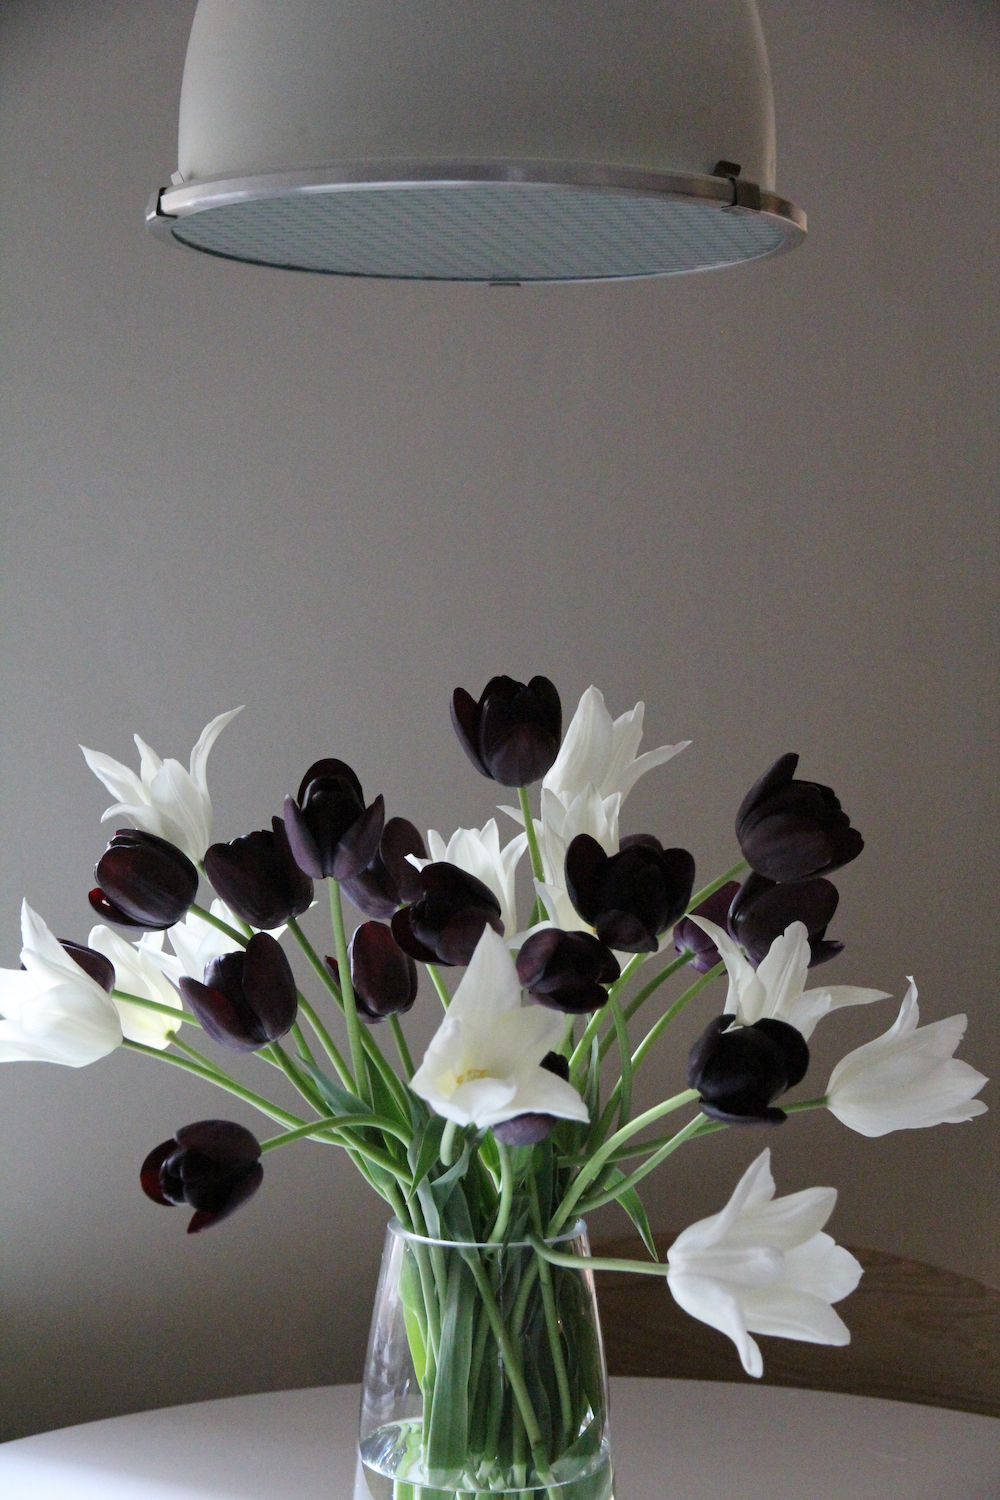 vase of black and white tulips under drop down light